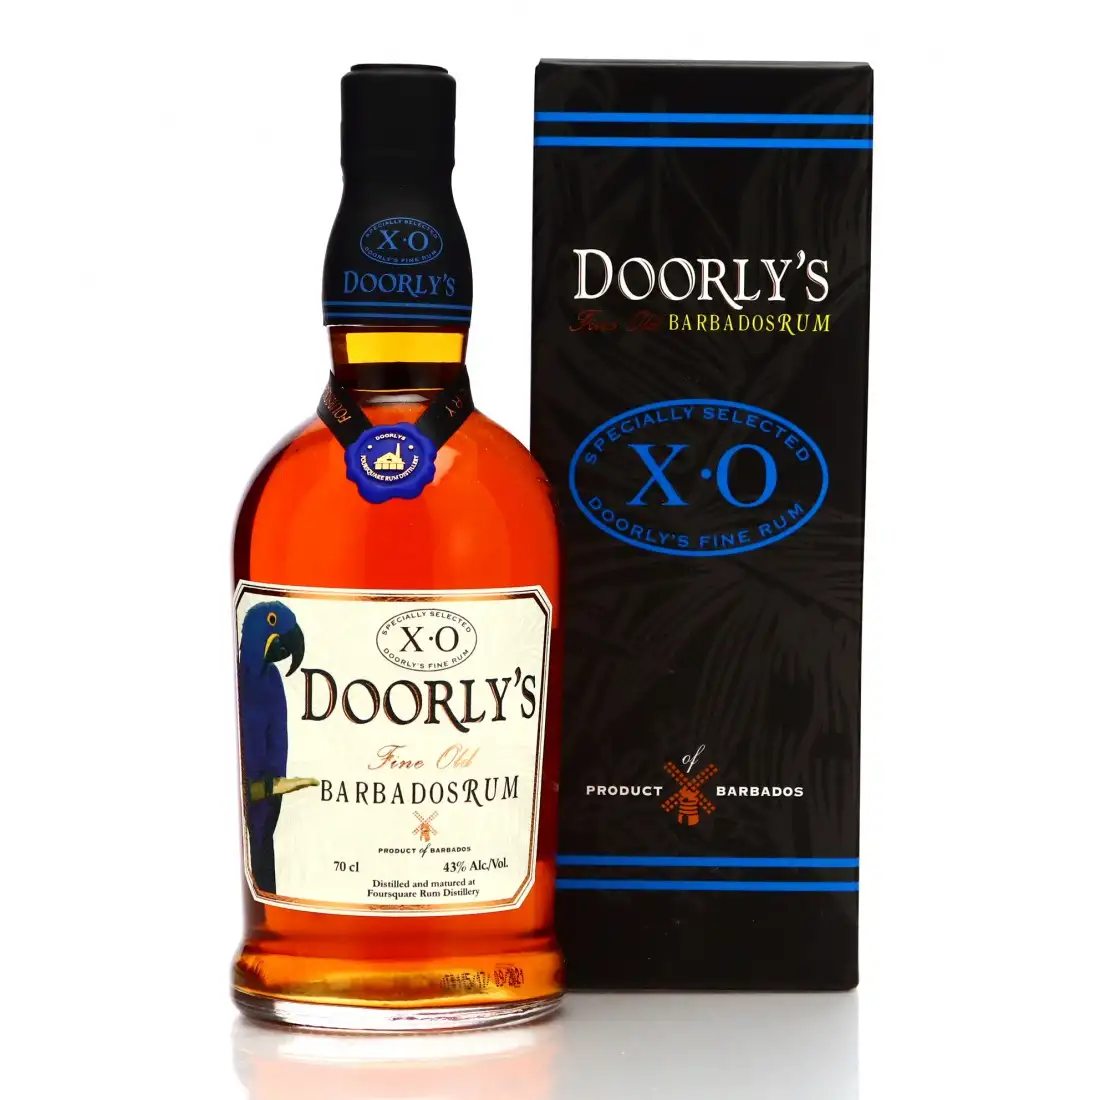 Image of the front of the bottle of the rum Doorly’s XO Fine Old Barbados Rum